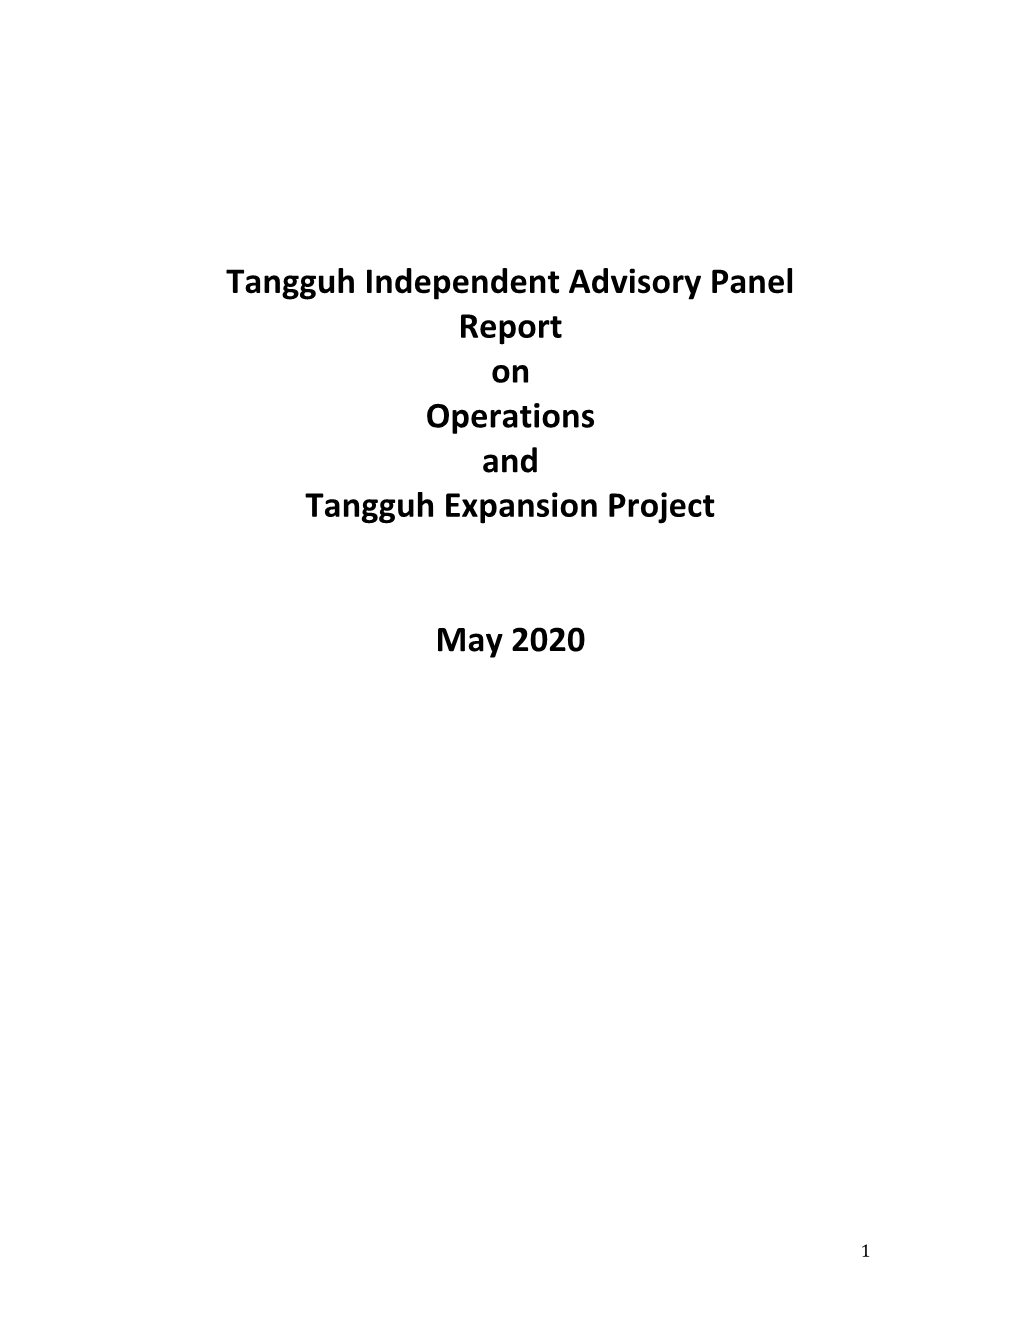 2020 TIAP Report on Operations and Tangguh Expansion Project